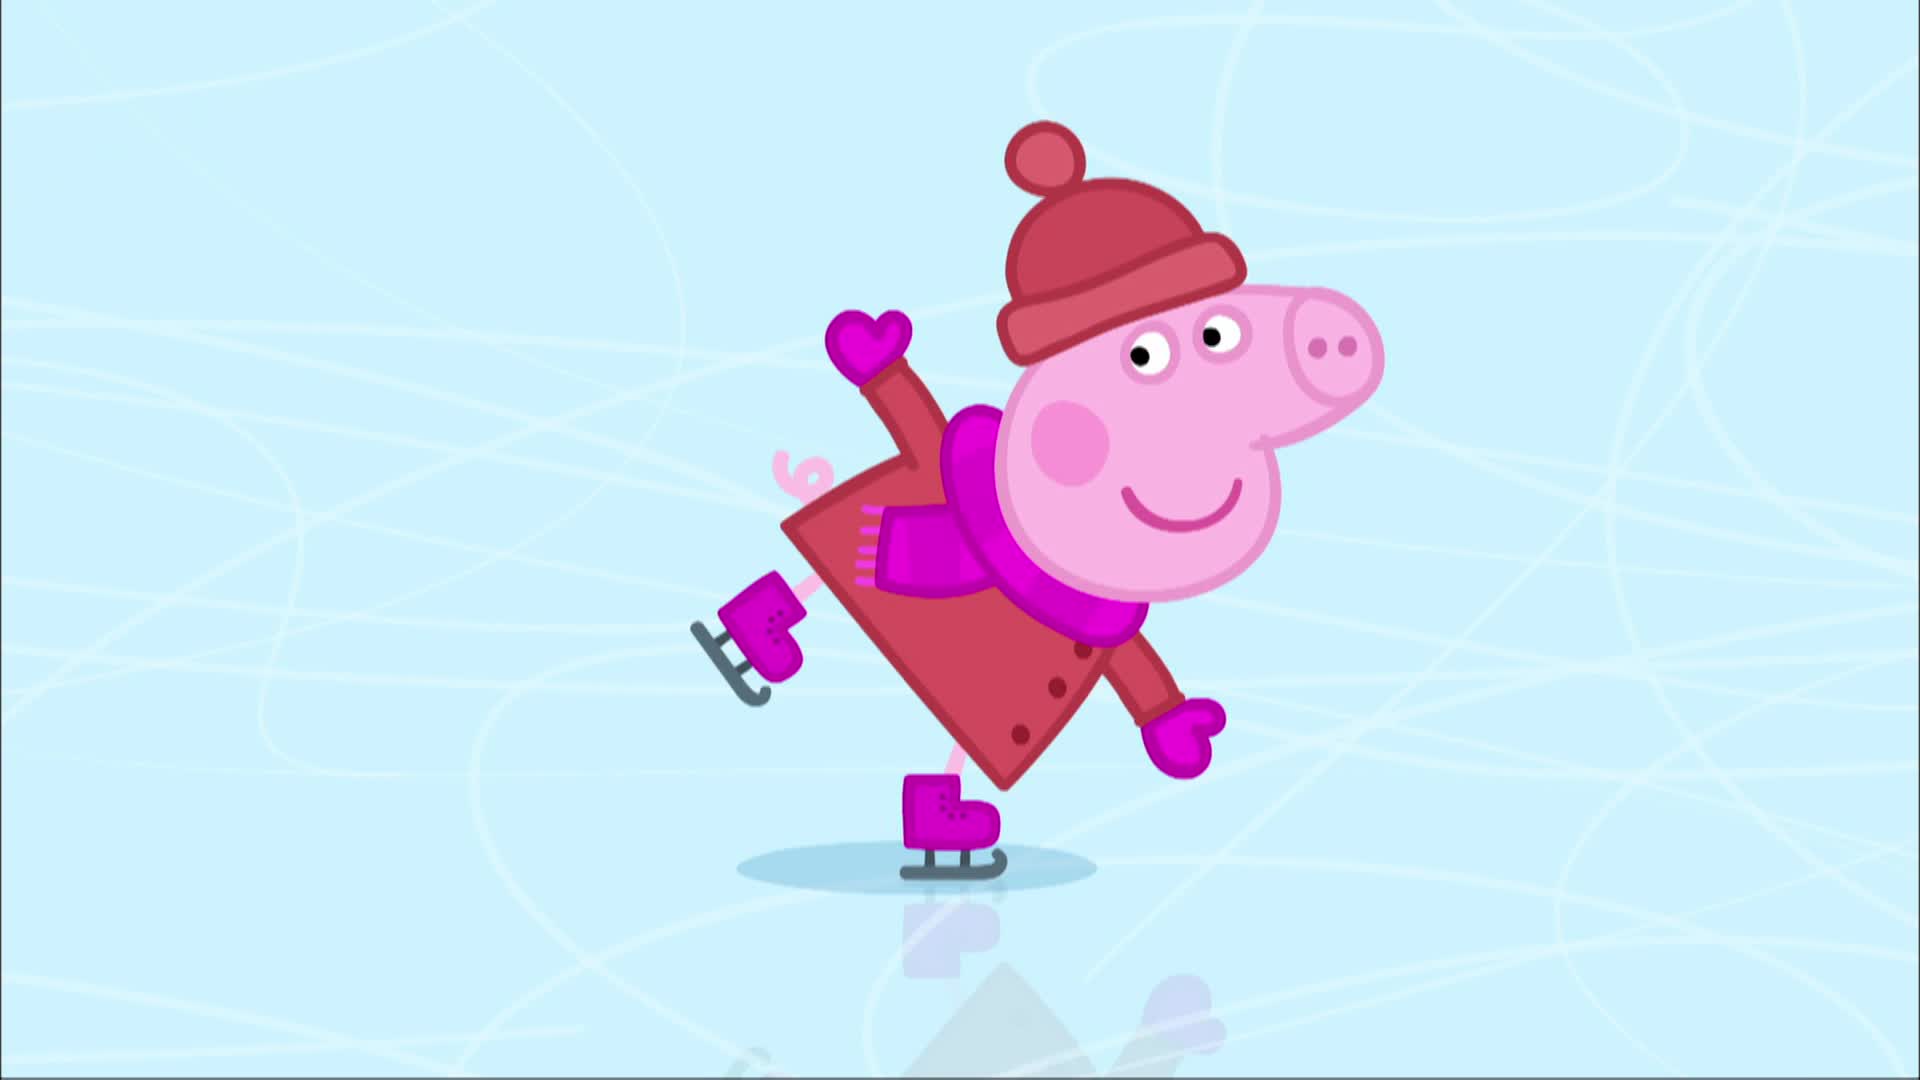 Peppa Pig Pig: Cold Winter Day